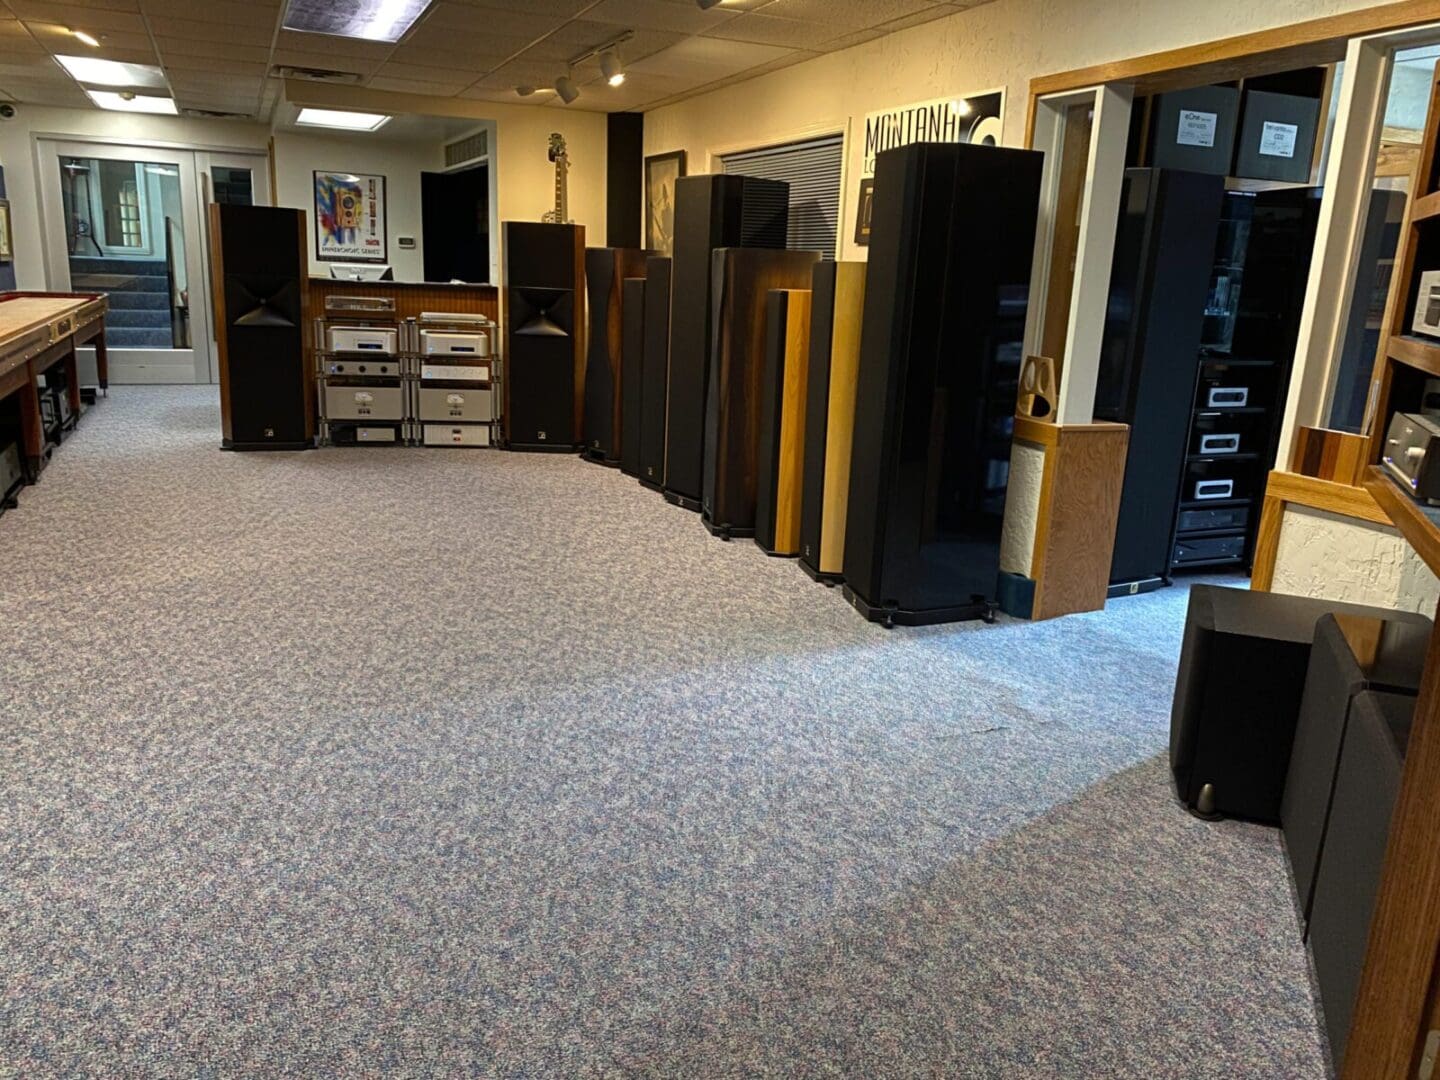 The Sound Station in Bartlesville's display room